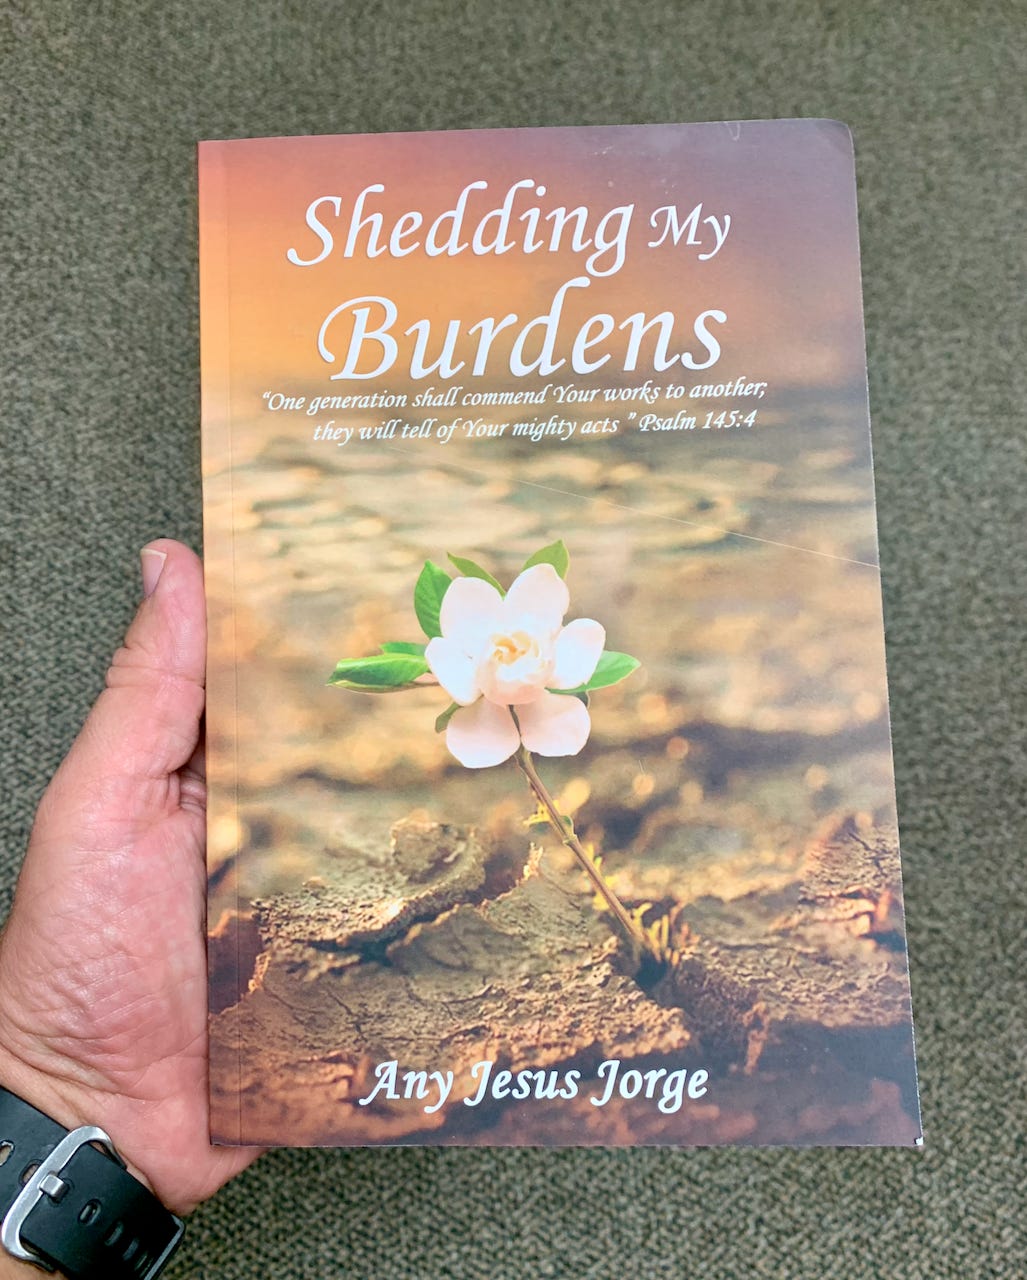 Picture of hand holding the book Shedding My Burdens by Any Jesus Jorge